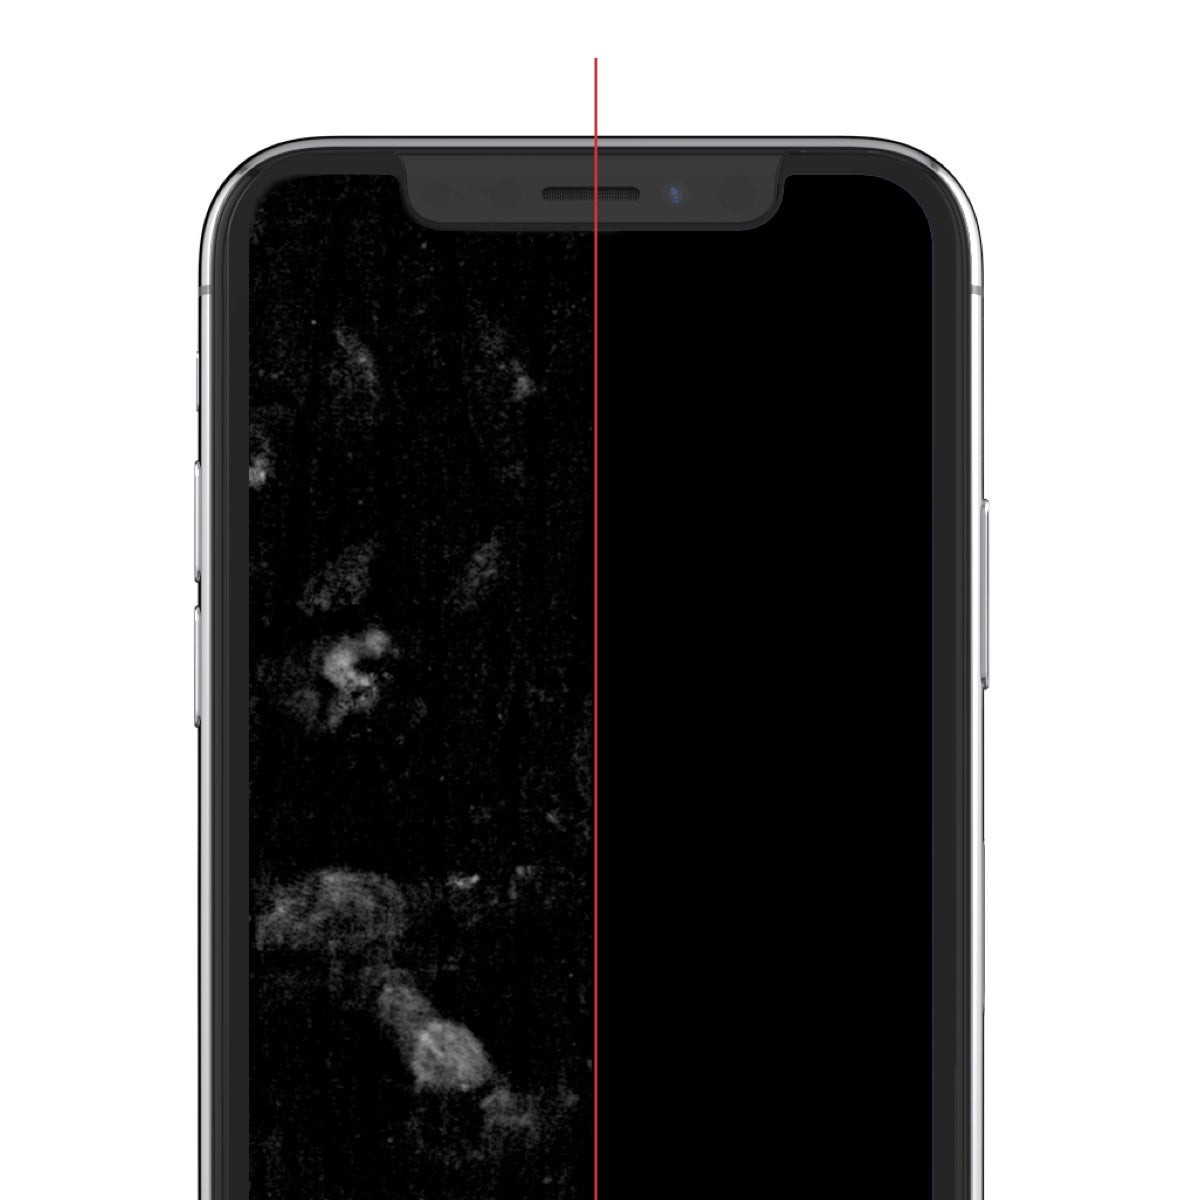 ZAGG InvisibleShield Glass+ Screen Protector – High-definition Tempered Glass for the Apple iPhone XS/ X – Impact & Scratch Protection - image 3 of 6